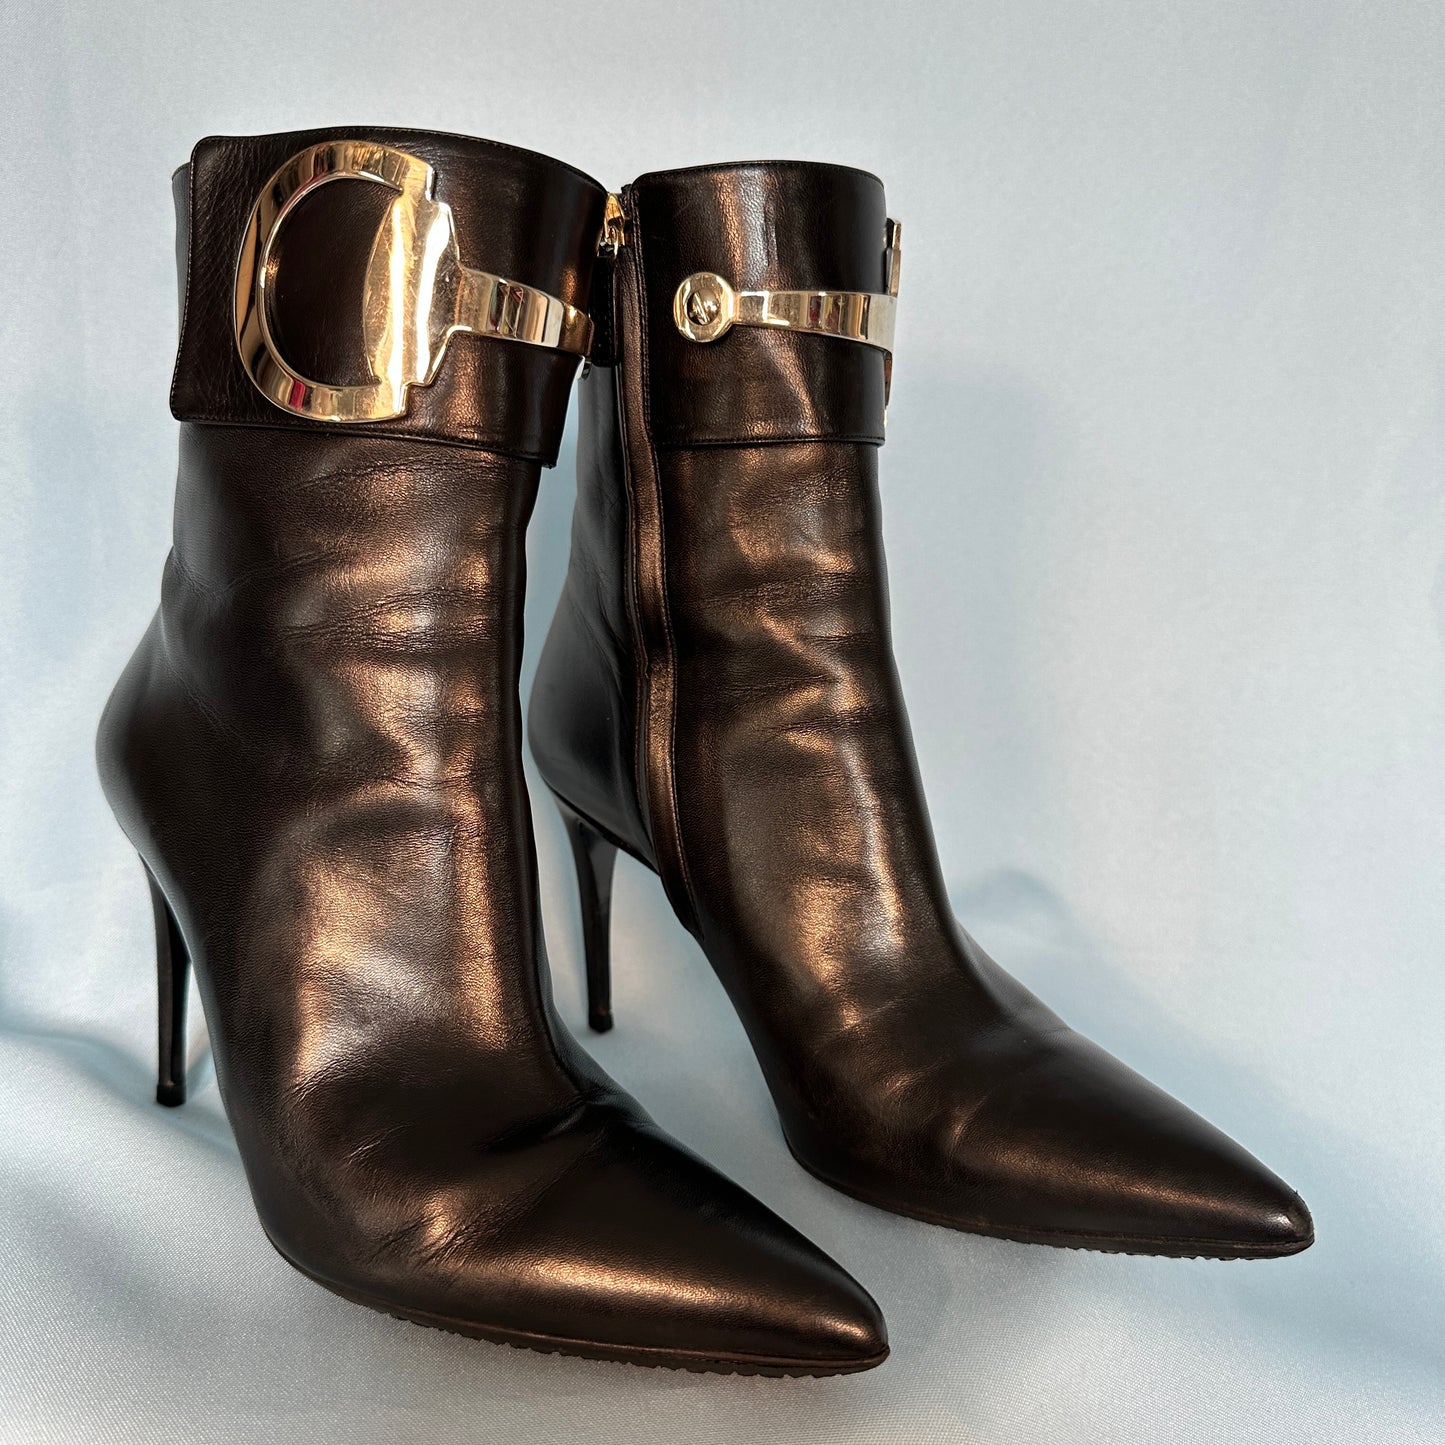 Gucci “Rooney” Large Horsebit Leather Boots